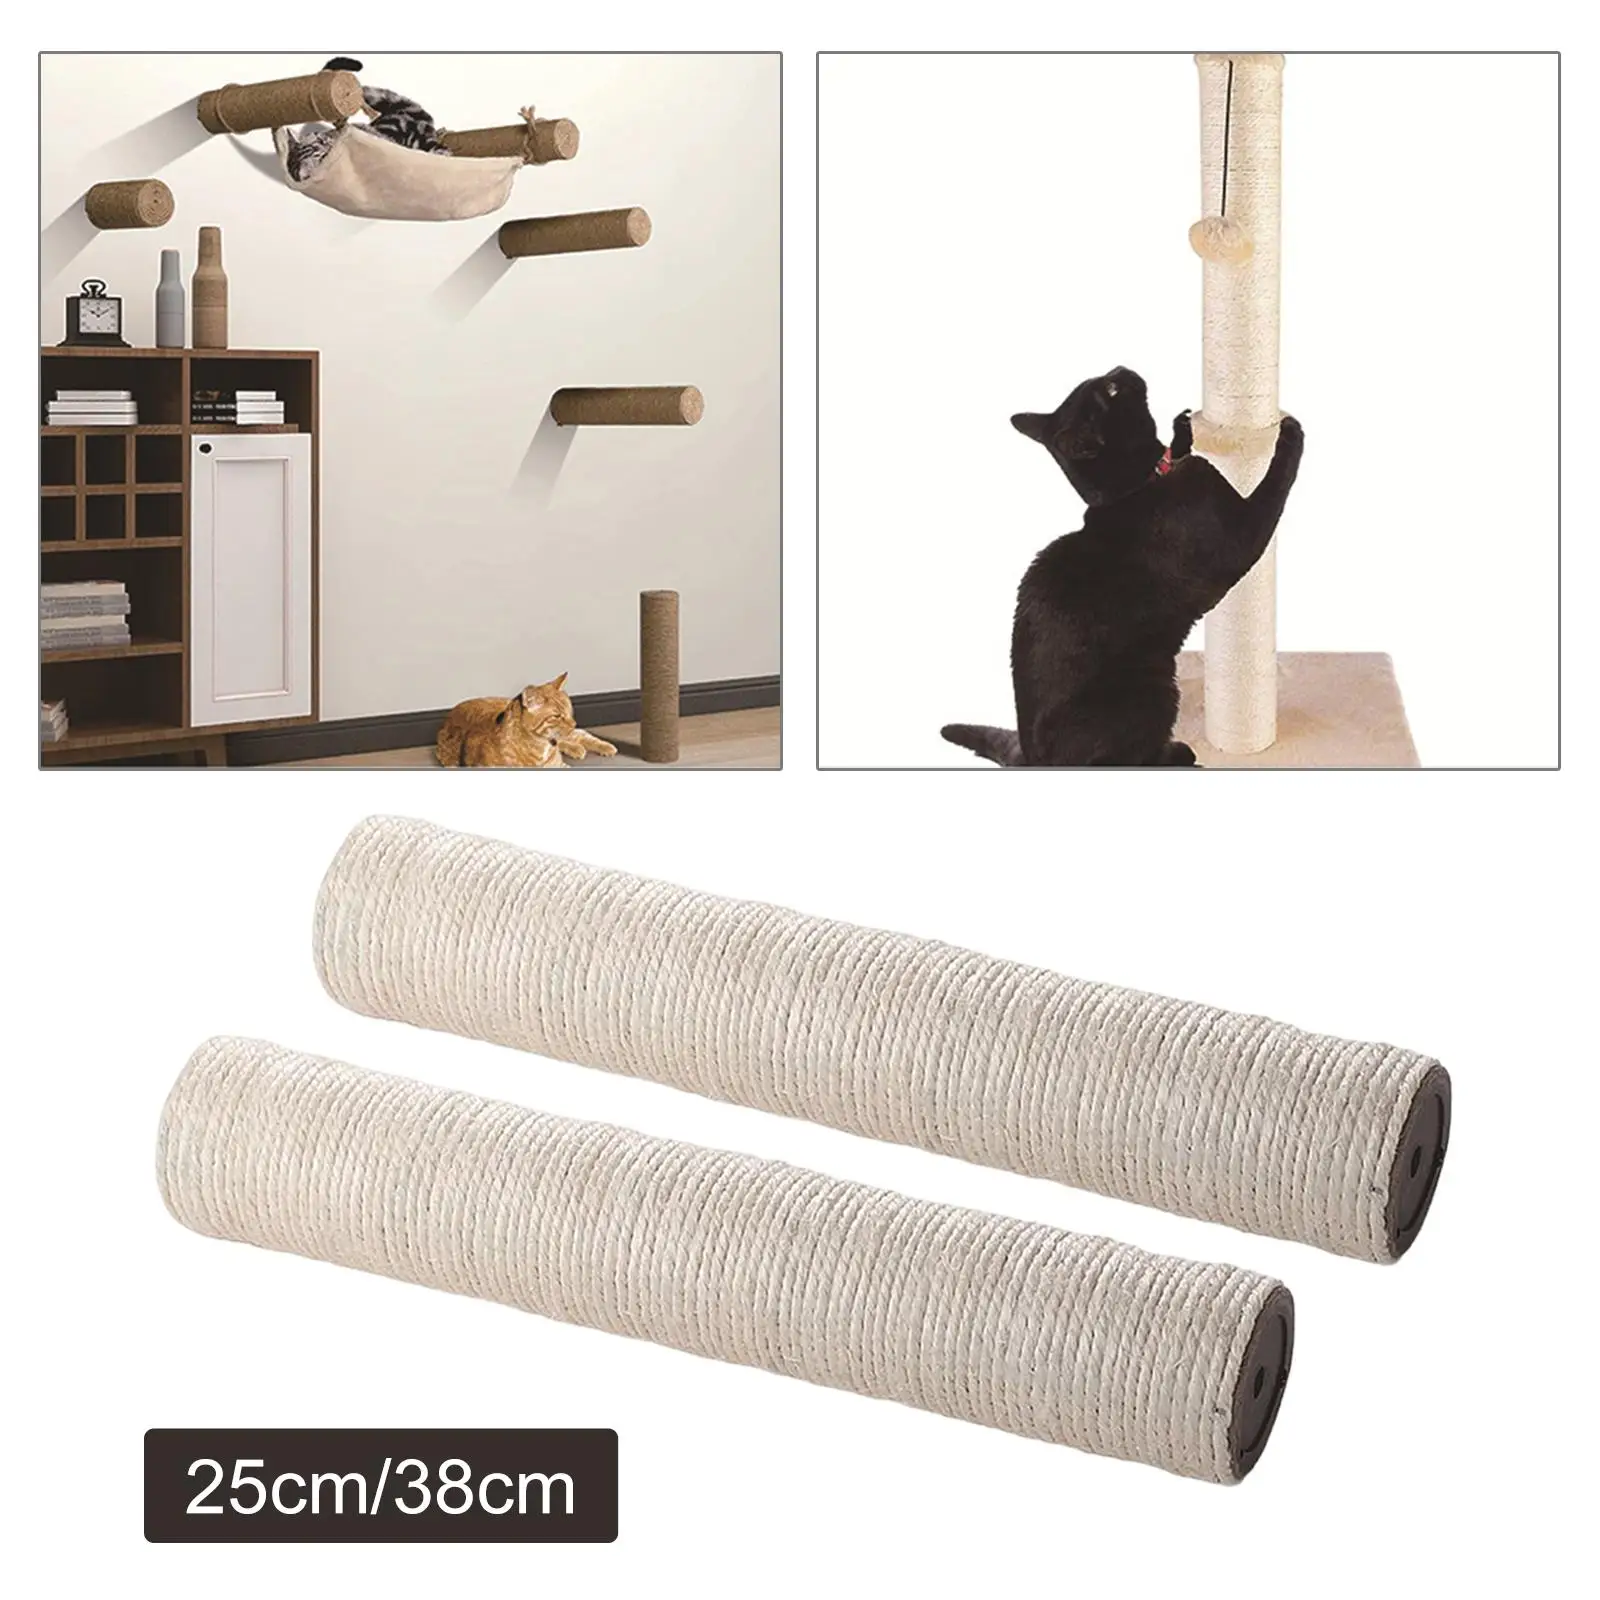 DIY Cat Scratching Post Replacement Parts Dia 2.75in Sofa Furniture Protector for Kitten Pet